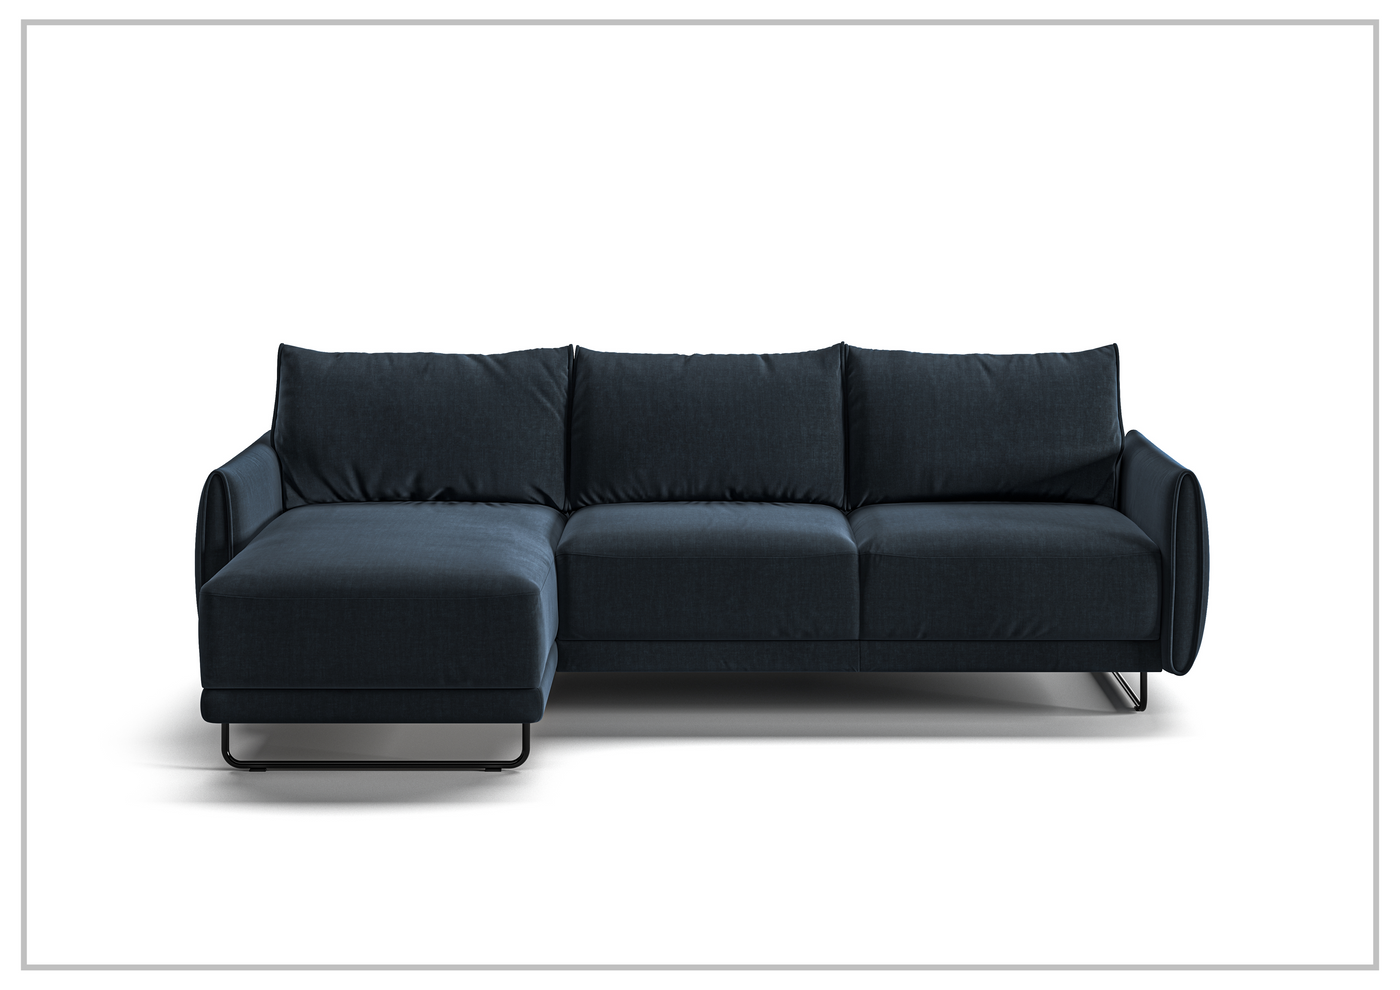 Dolphin Fabric Sectional Sofa Sleeper With Storage